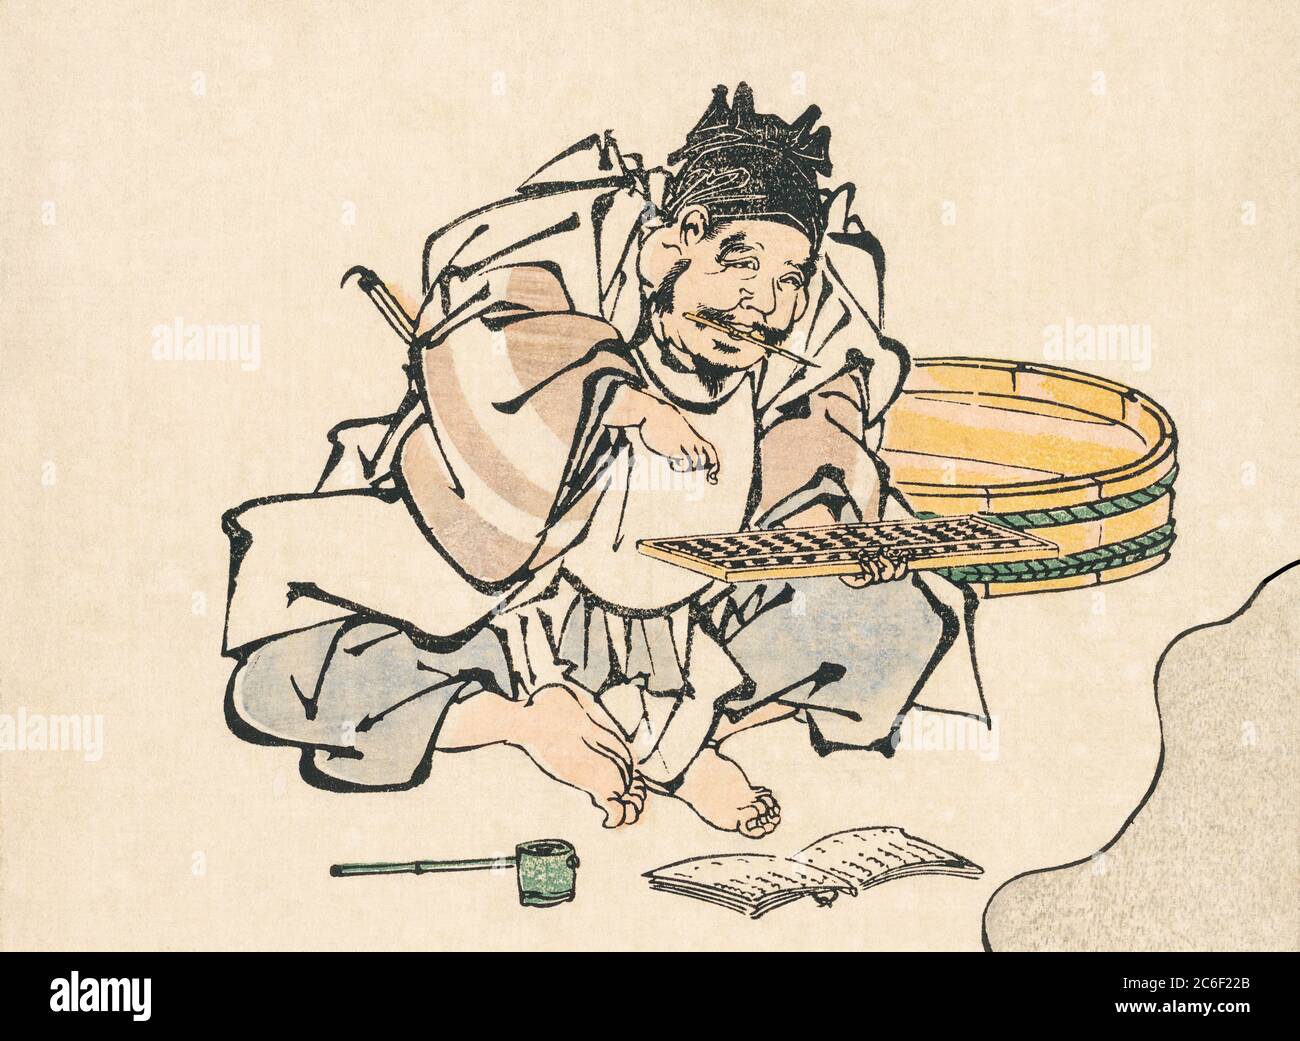 A Japanese man using a soroban, or abacus.  Detail from an 18th or 19th century woodcut by Japanese artist Toyohiro Utagawa. Stock Photo